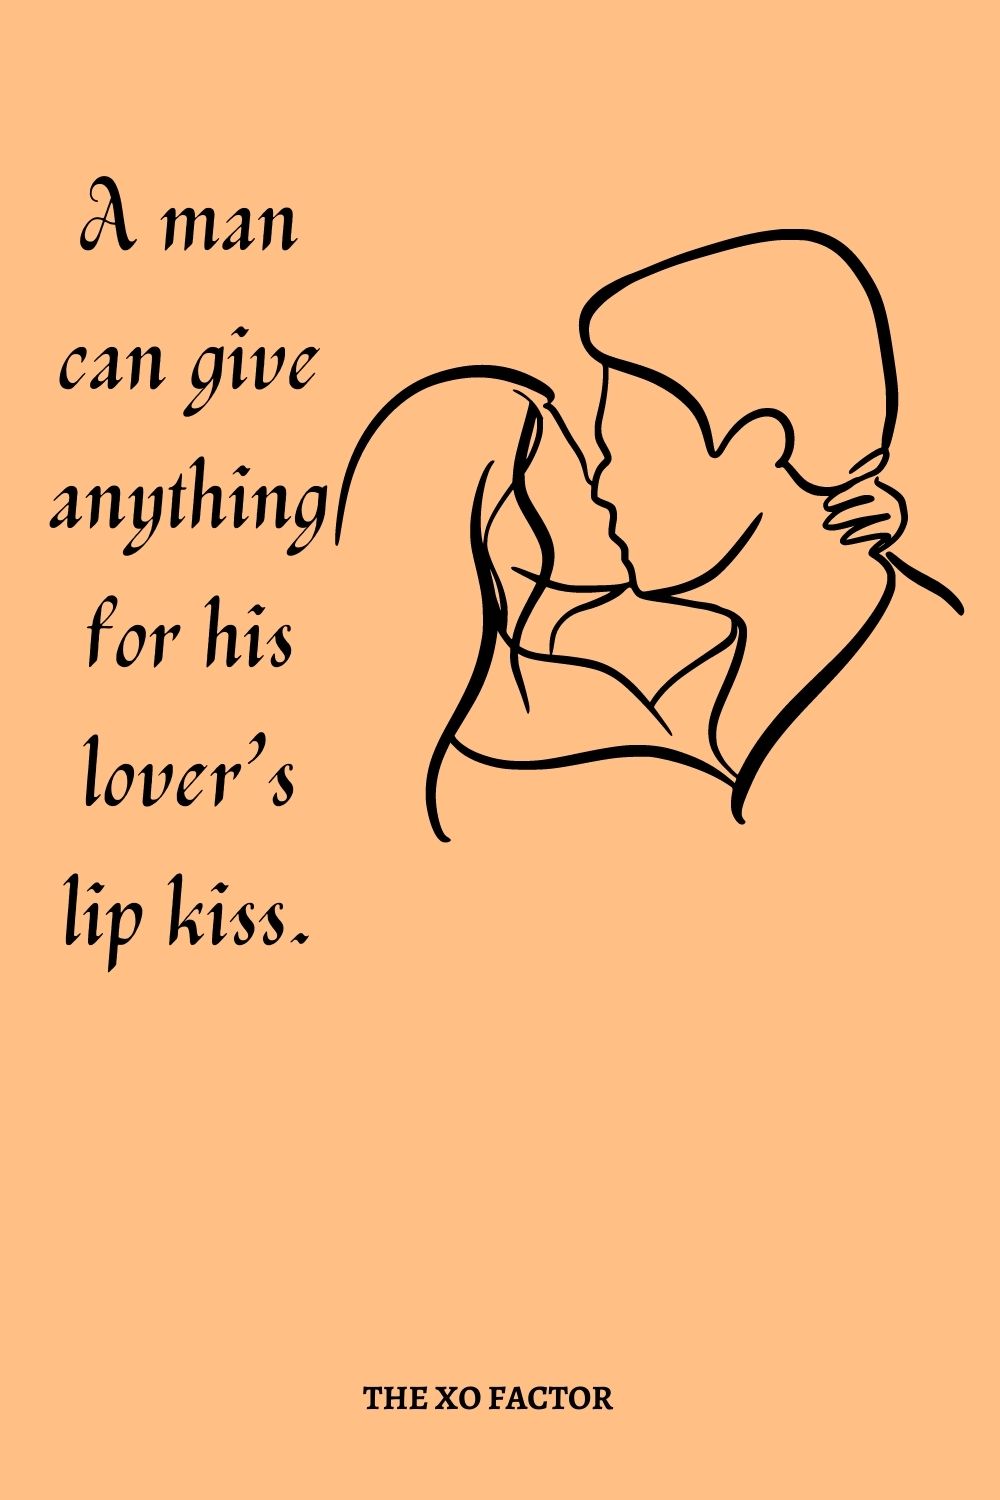 A man can give anything for his lover’s lip kiss.